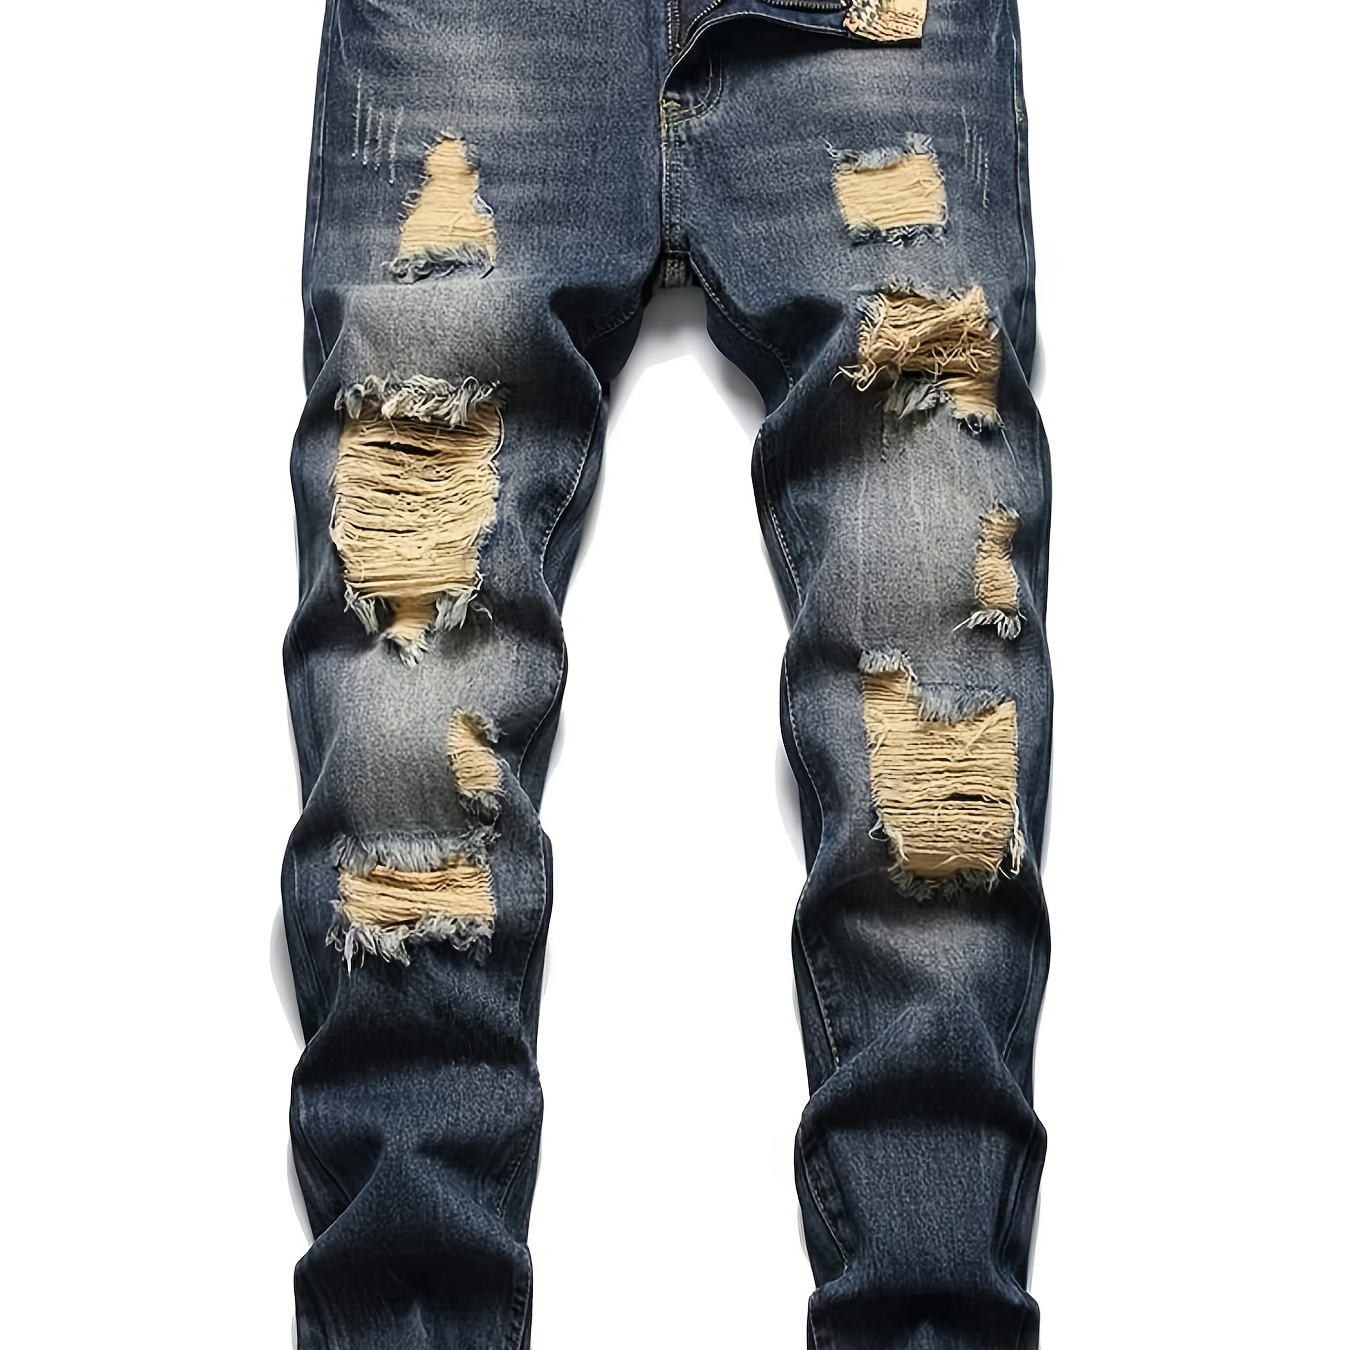 

Regular Fit Ripped Jeans, Men's Casual Street Style Distressed Denim Pants For All Seasons